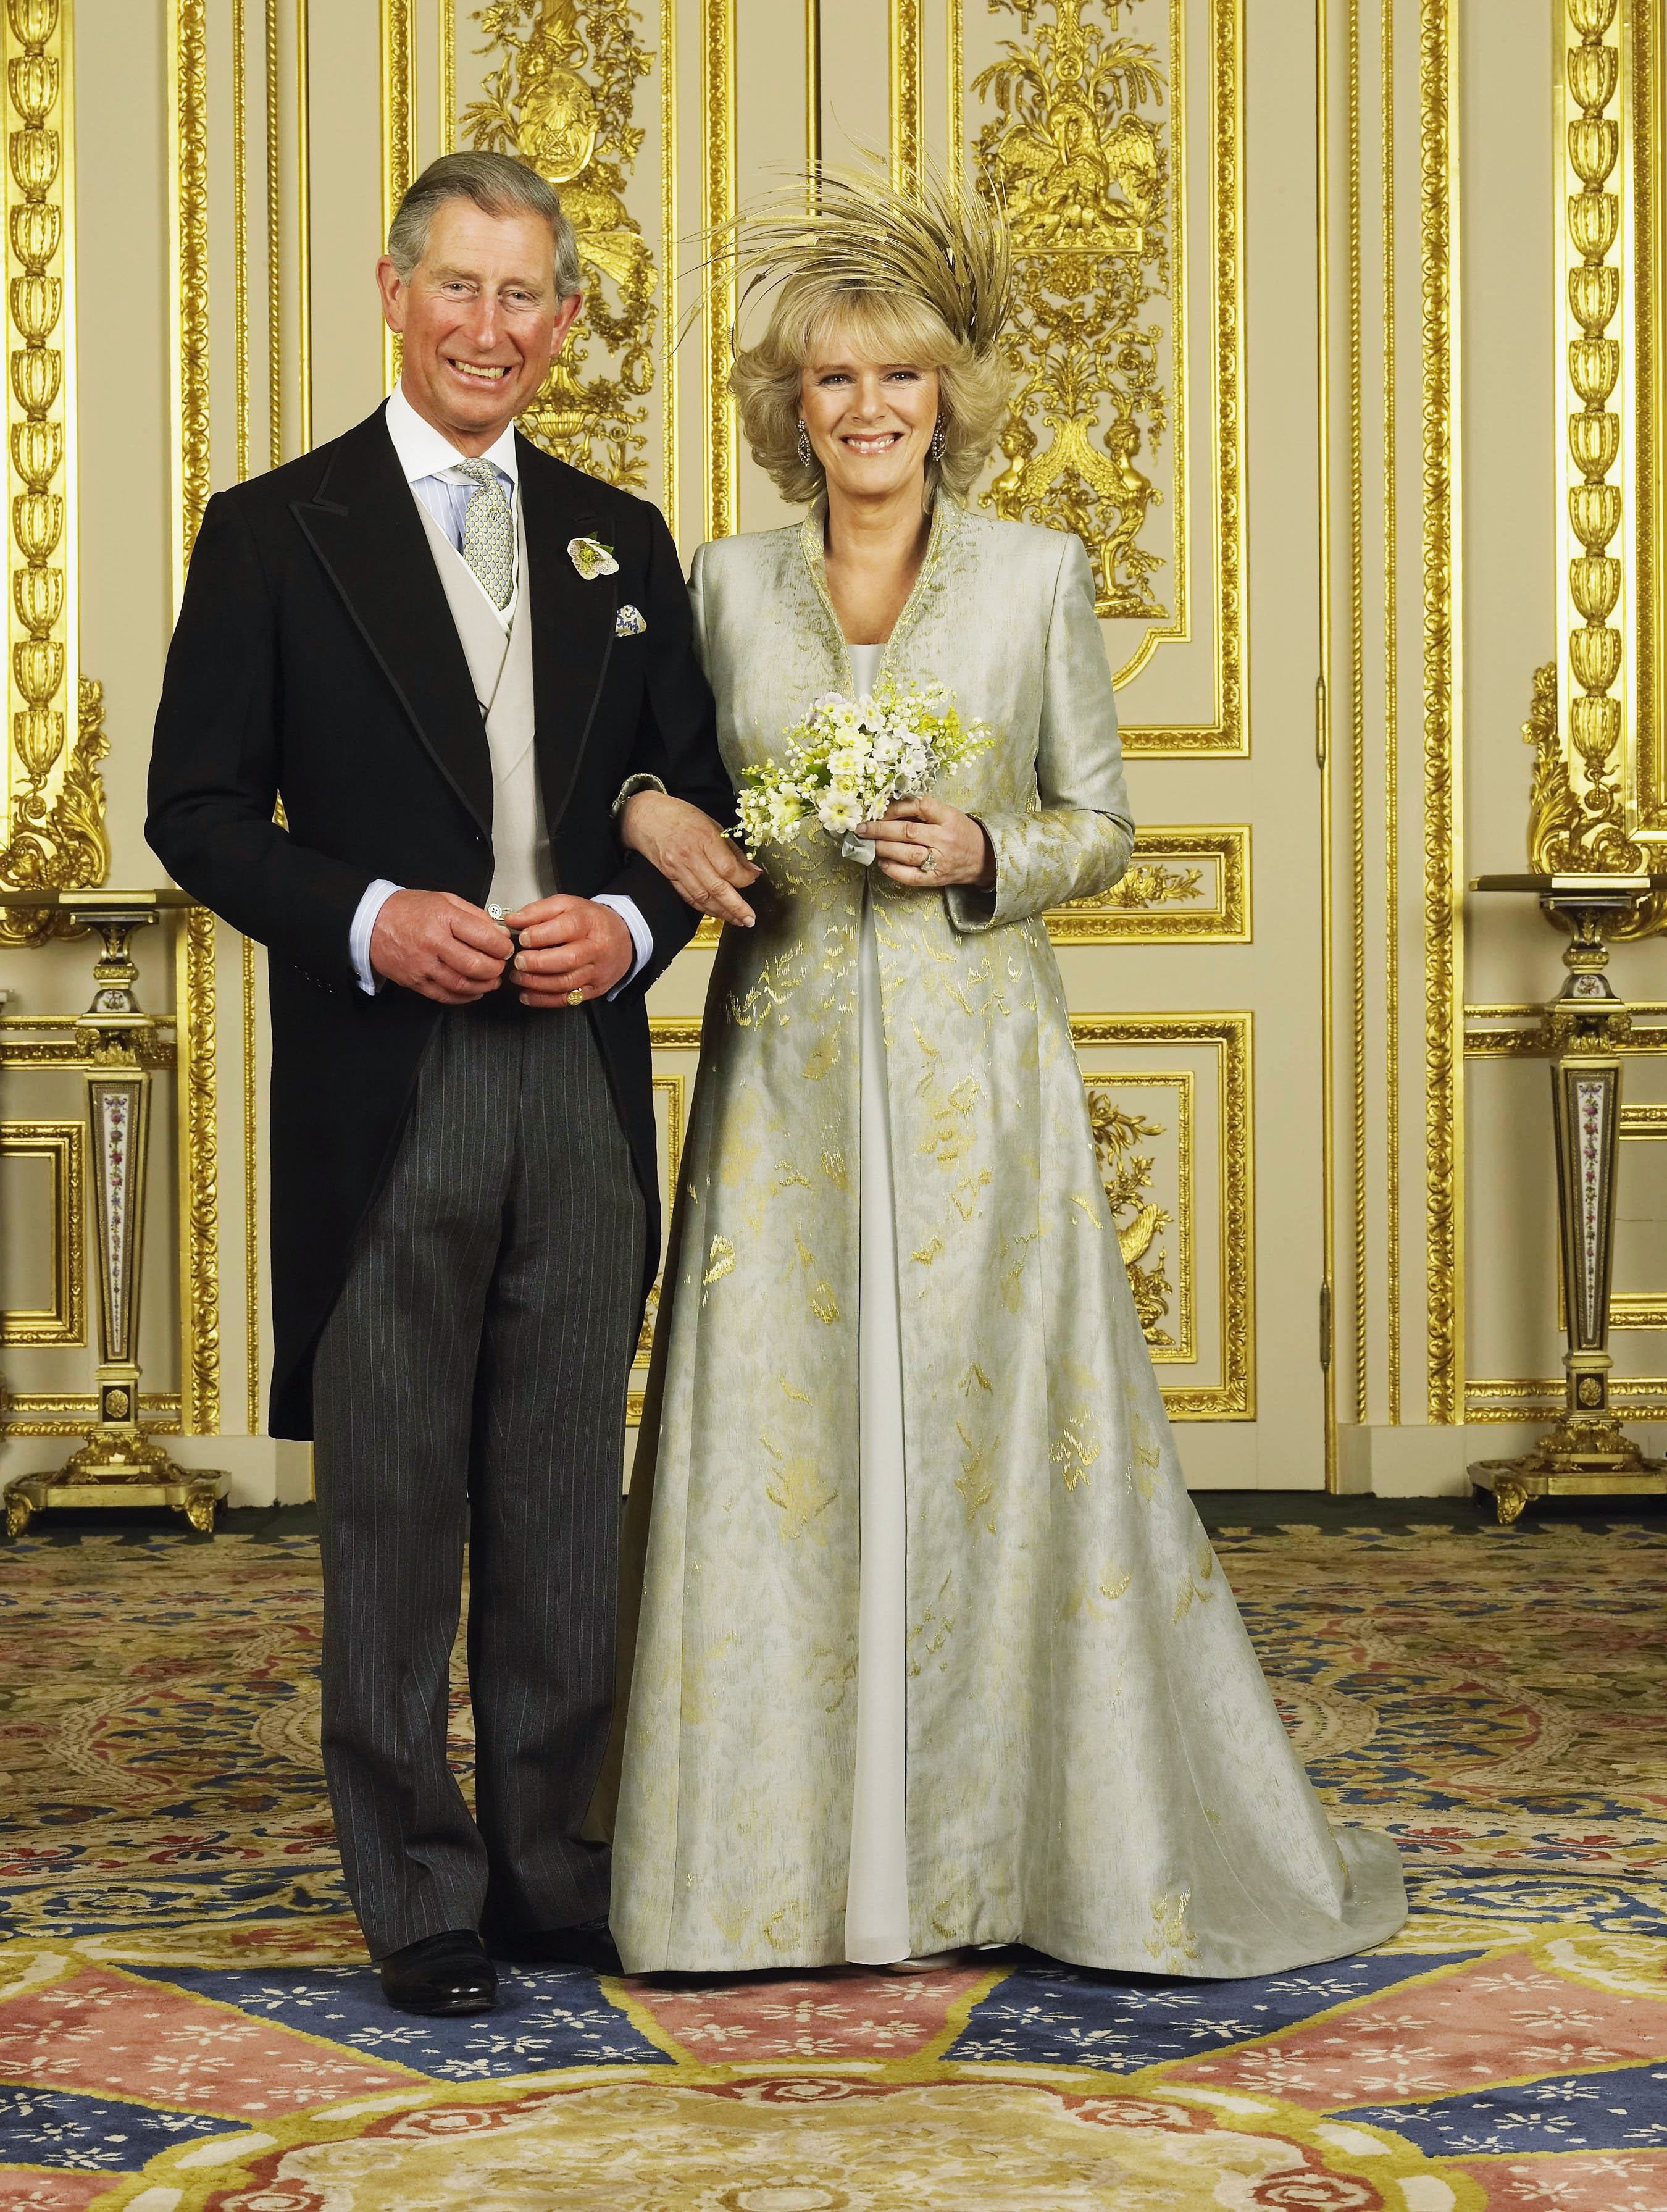 Newlyweds Prince Charles and Camilla, Duchess of Cornwall pictured in the White Drawing Room at Windsor Castle after their wedding ceremony on April 9 2005 in Windsor, England. | Source: Getty Images